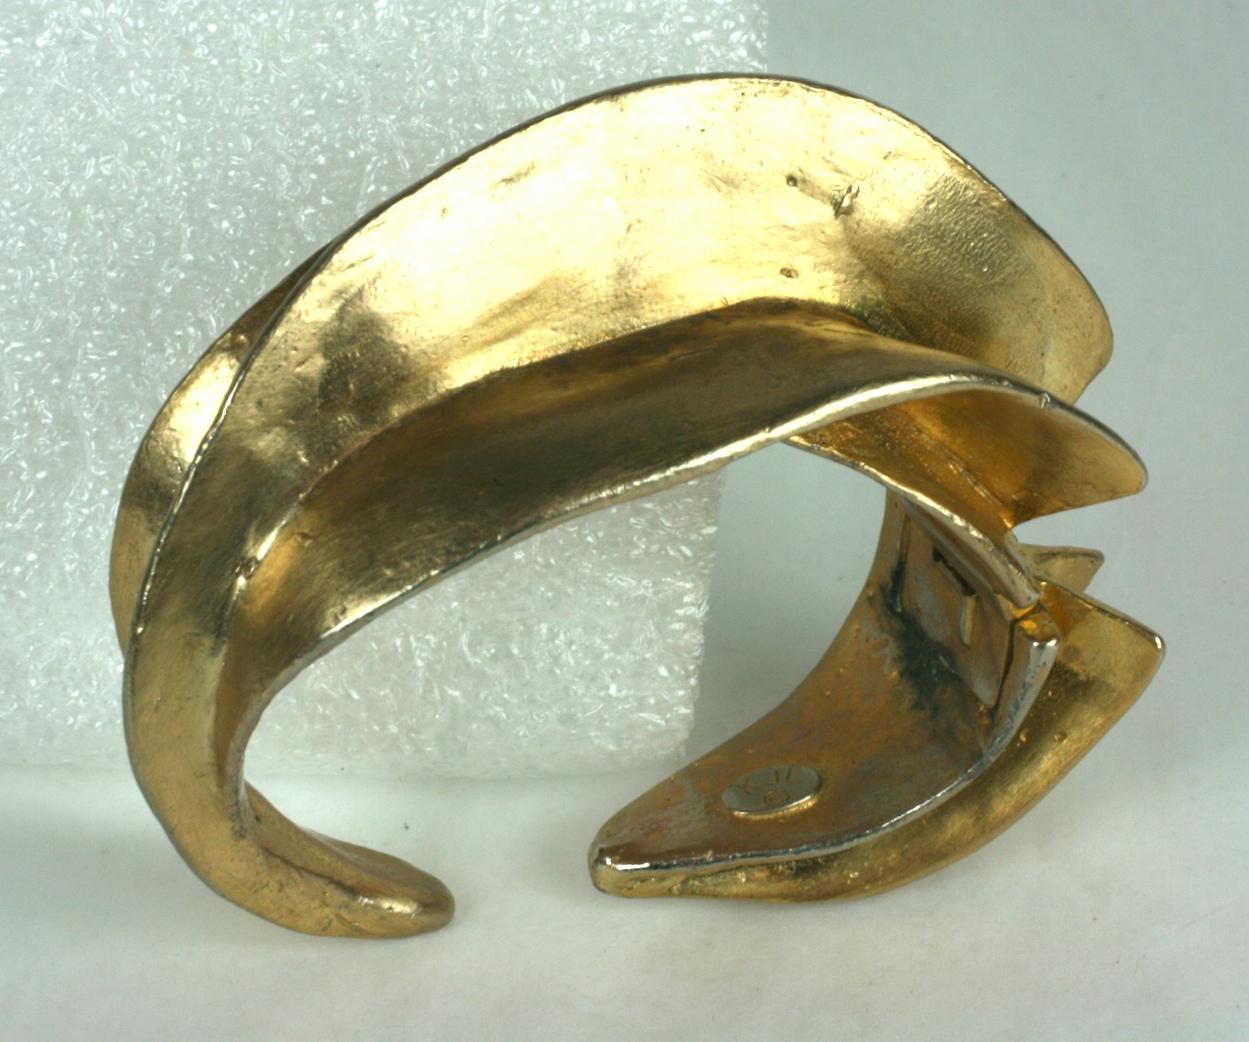 Kenneth Jay Lane Ethnic inspired patinaed gilt cuff with clamp hinged closure. Dimensional swirl design looks incredibly sculptural and modern when worn. It can be worn in different ways and looks different from every angle.
1.25